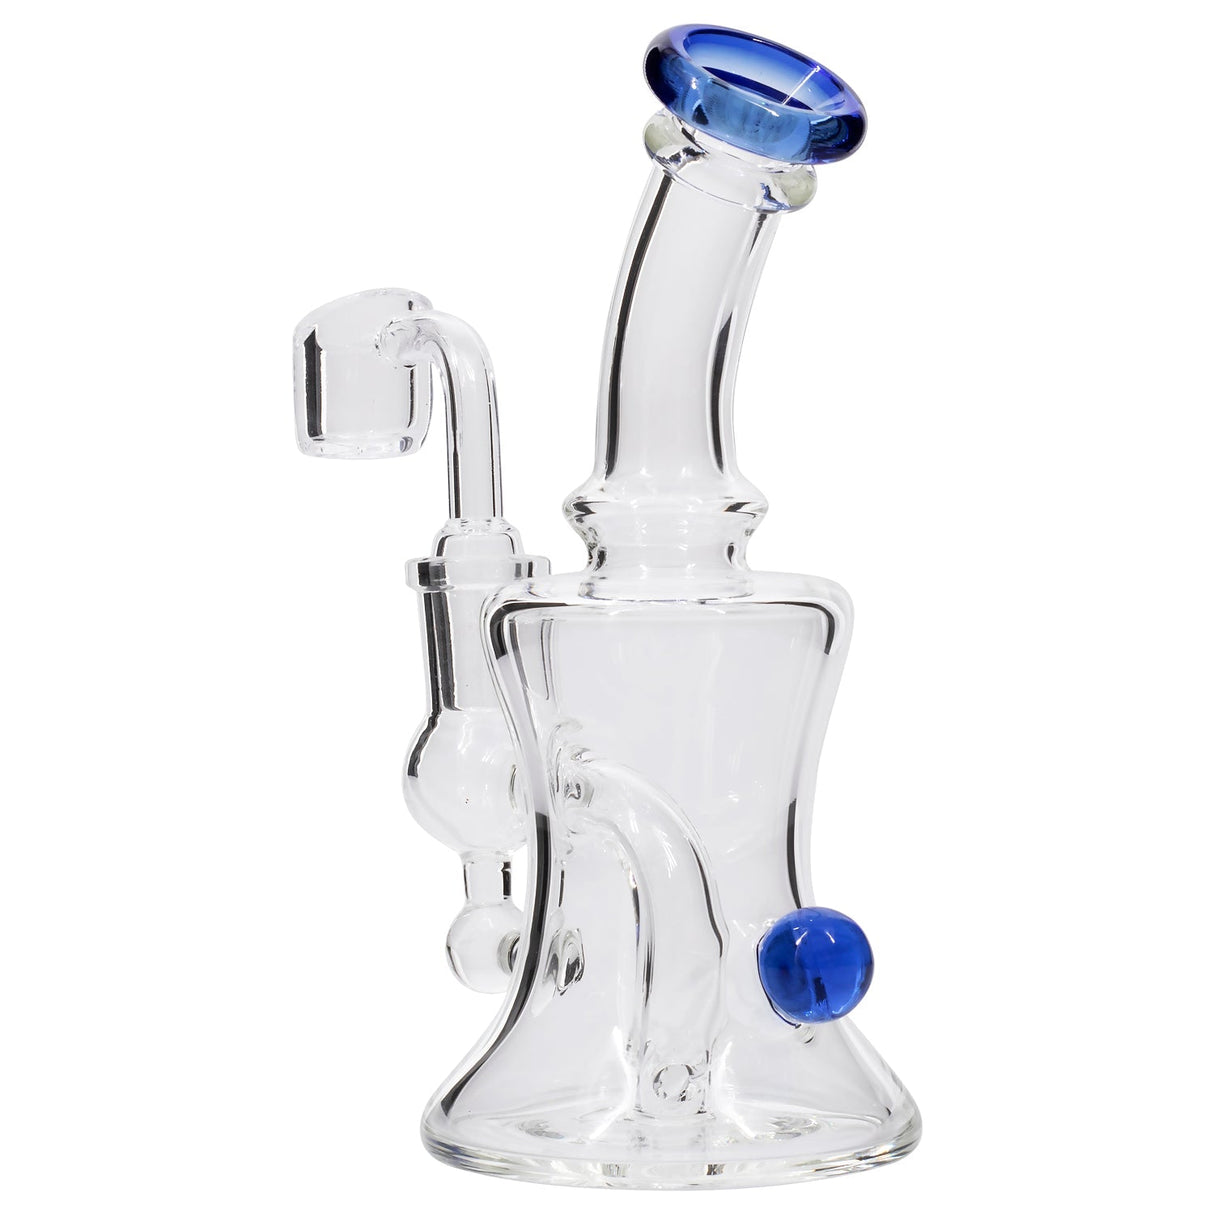 Glassic Marble-Studded Dab Rig with Blue Accents and Banger Hanger, Front View